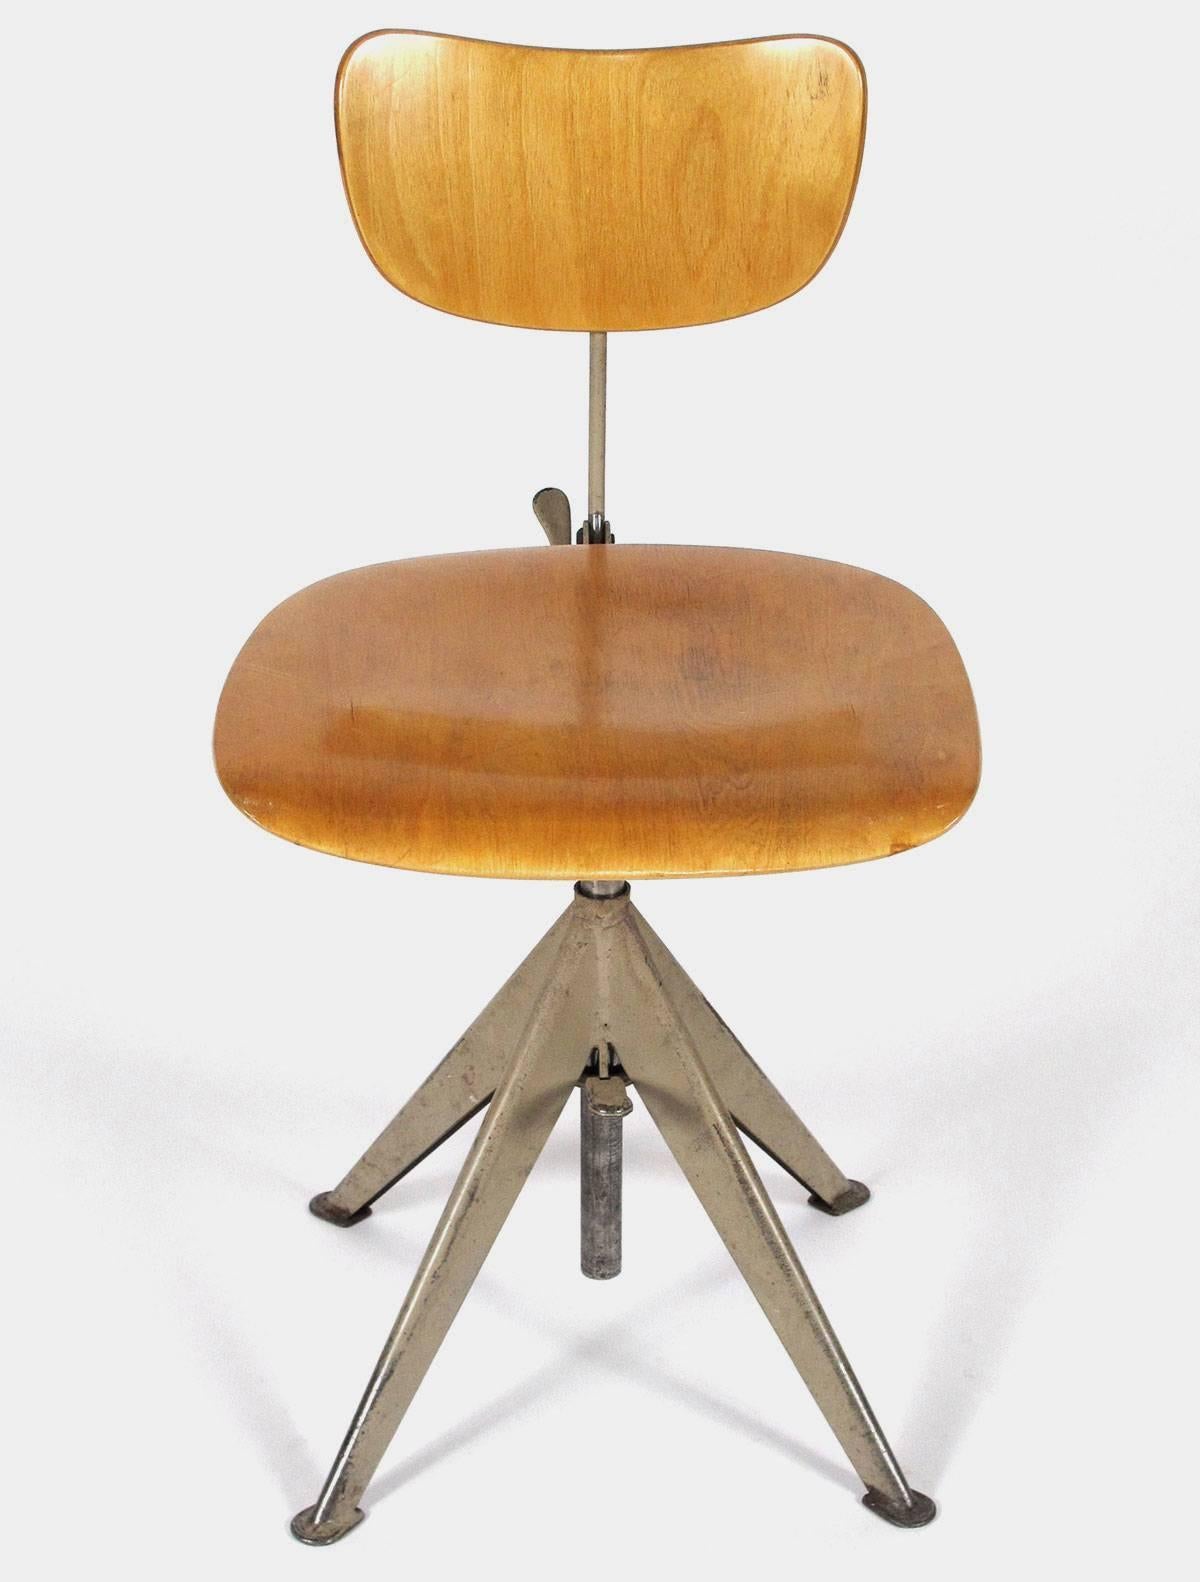 Elegant blonde wood and steel Industrial desk chair by Swedish designer Odelberg Olsen in all original condition. These chairs were imported and retailed by Knoll, and this chair was originally used in an Oregon architectural office. The seat height